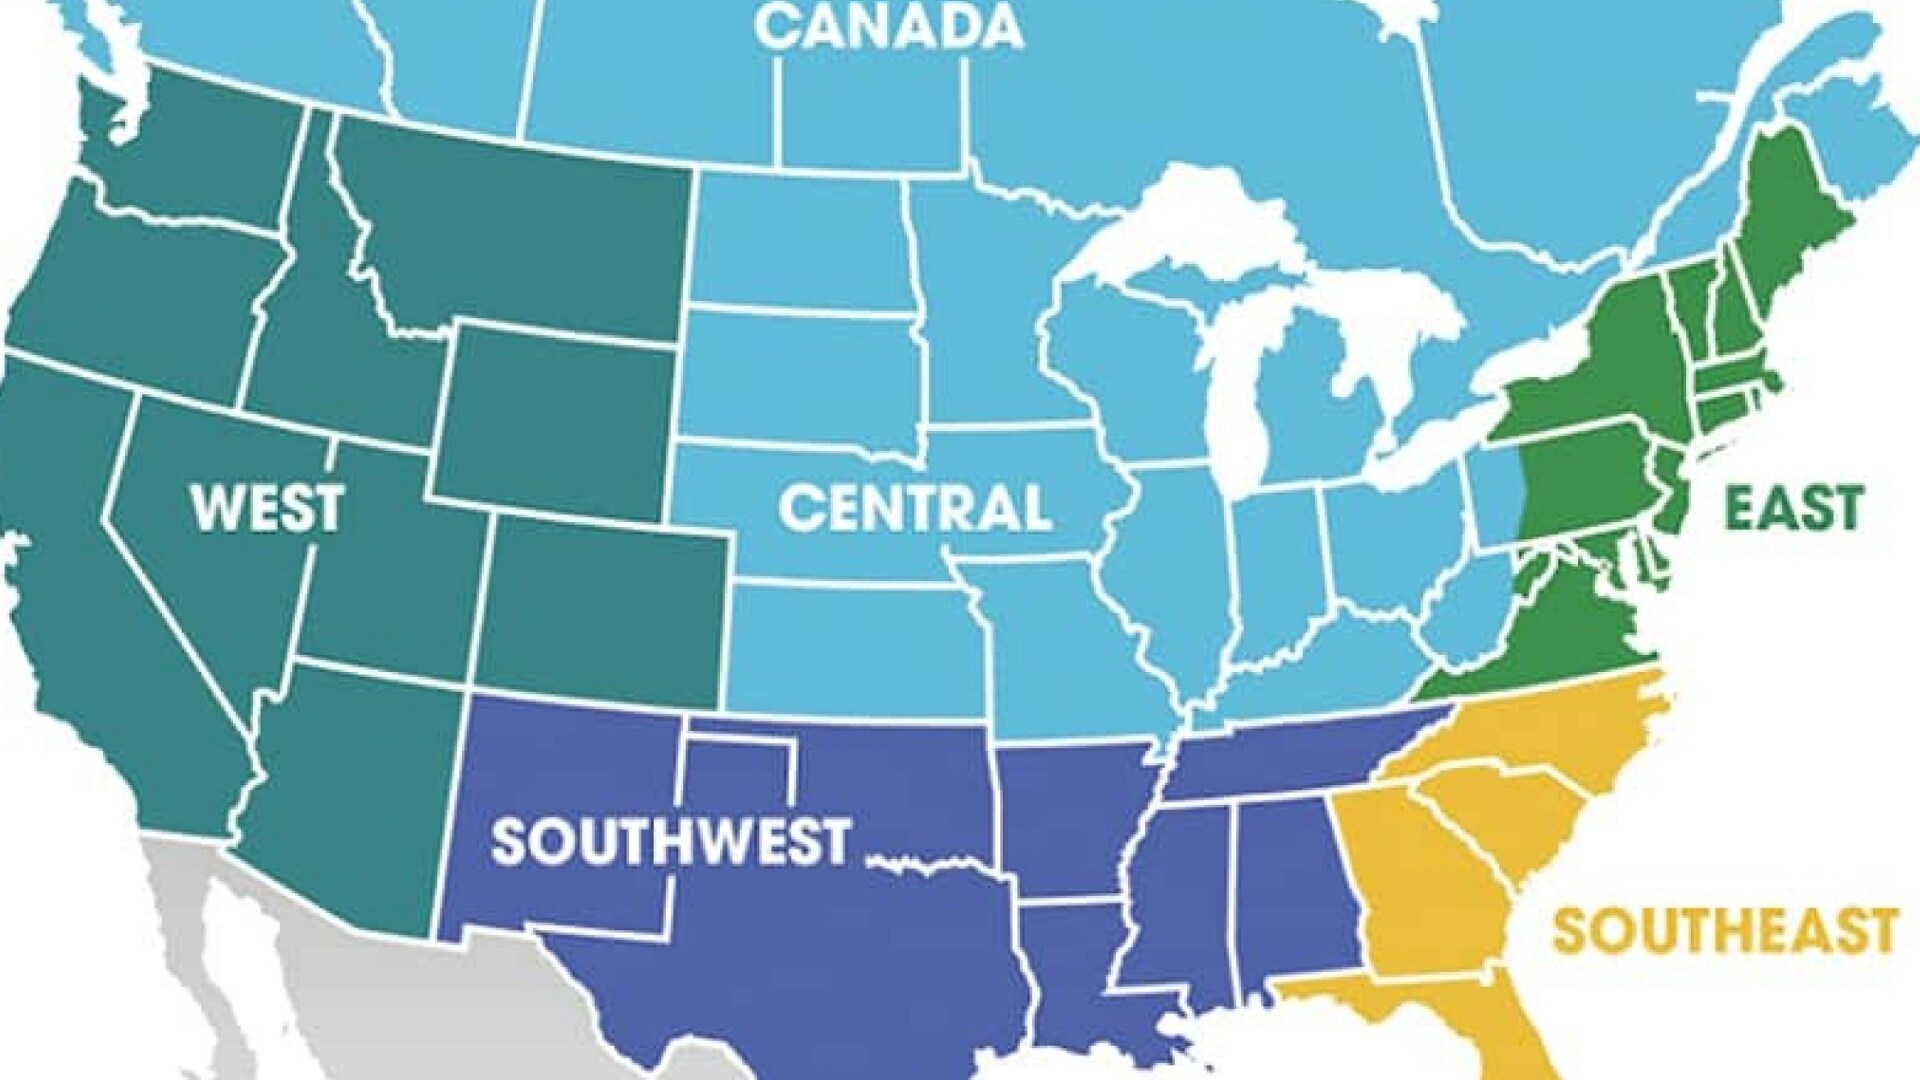 GAF Commercial customer care regionalized territory map